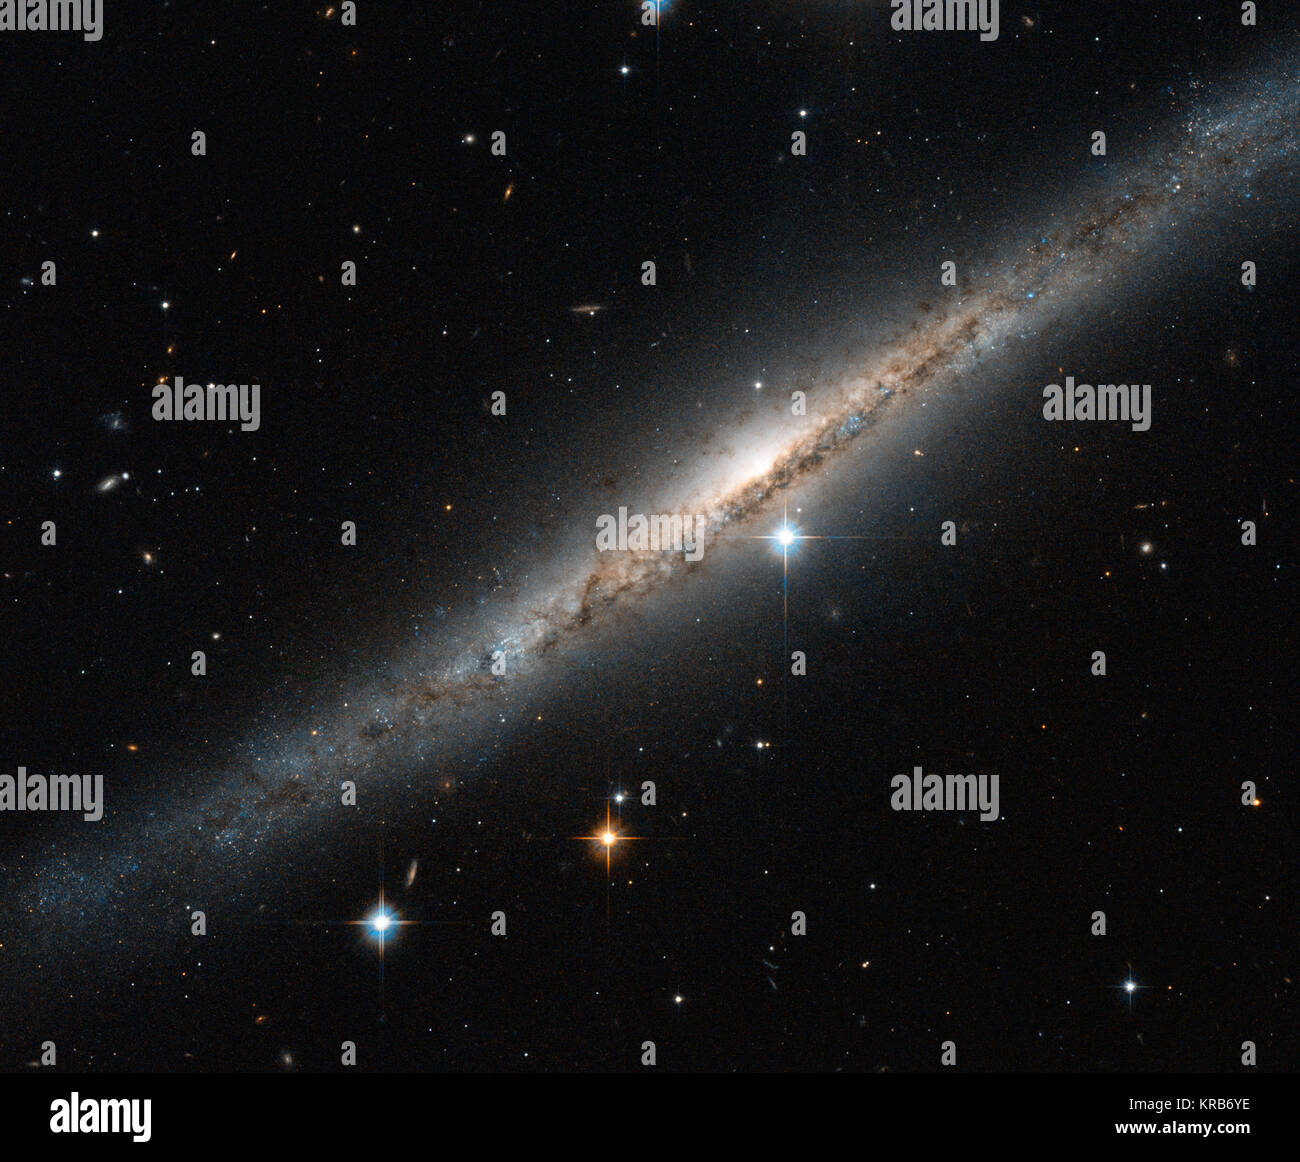 This  thin, glittering streak of stars is the spiral galaxy ESO 121-6, which  lies in the southern constellation of Pictor (The Painter's Easel).  Viewed almost exactly side-on, the intricate structure of the swirling  arms is hidden, but the full length of the galaxy can be seen —  including the intense glow from the central bulge, a dense region of  tightly packed young stars sitting at the centre of the spiral arms. Tendrils  of dark dust can be seen across the frame, partially obscuring the  bright centre of the galaxy and continuing out towards the smattering of  stars at its edges, where Stock Photo